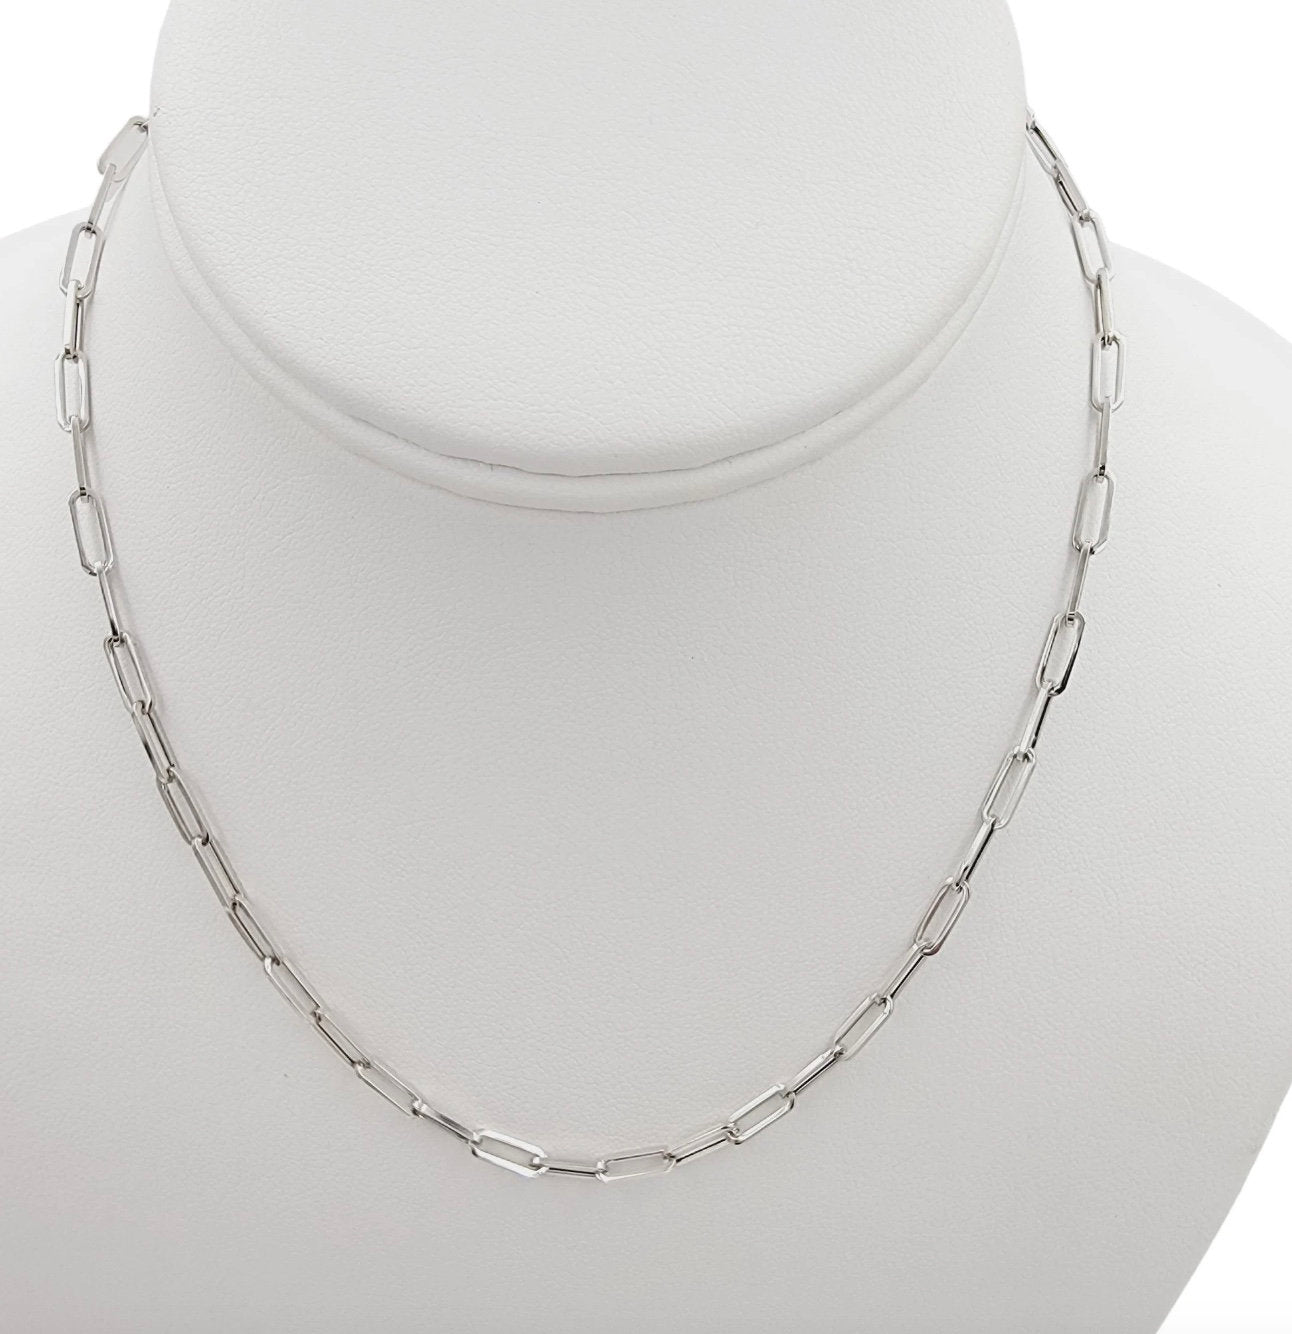 Women's 14k Solid White Gold Paperclip Chain Necklace,16,20,22 Inch.